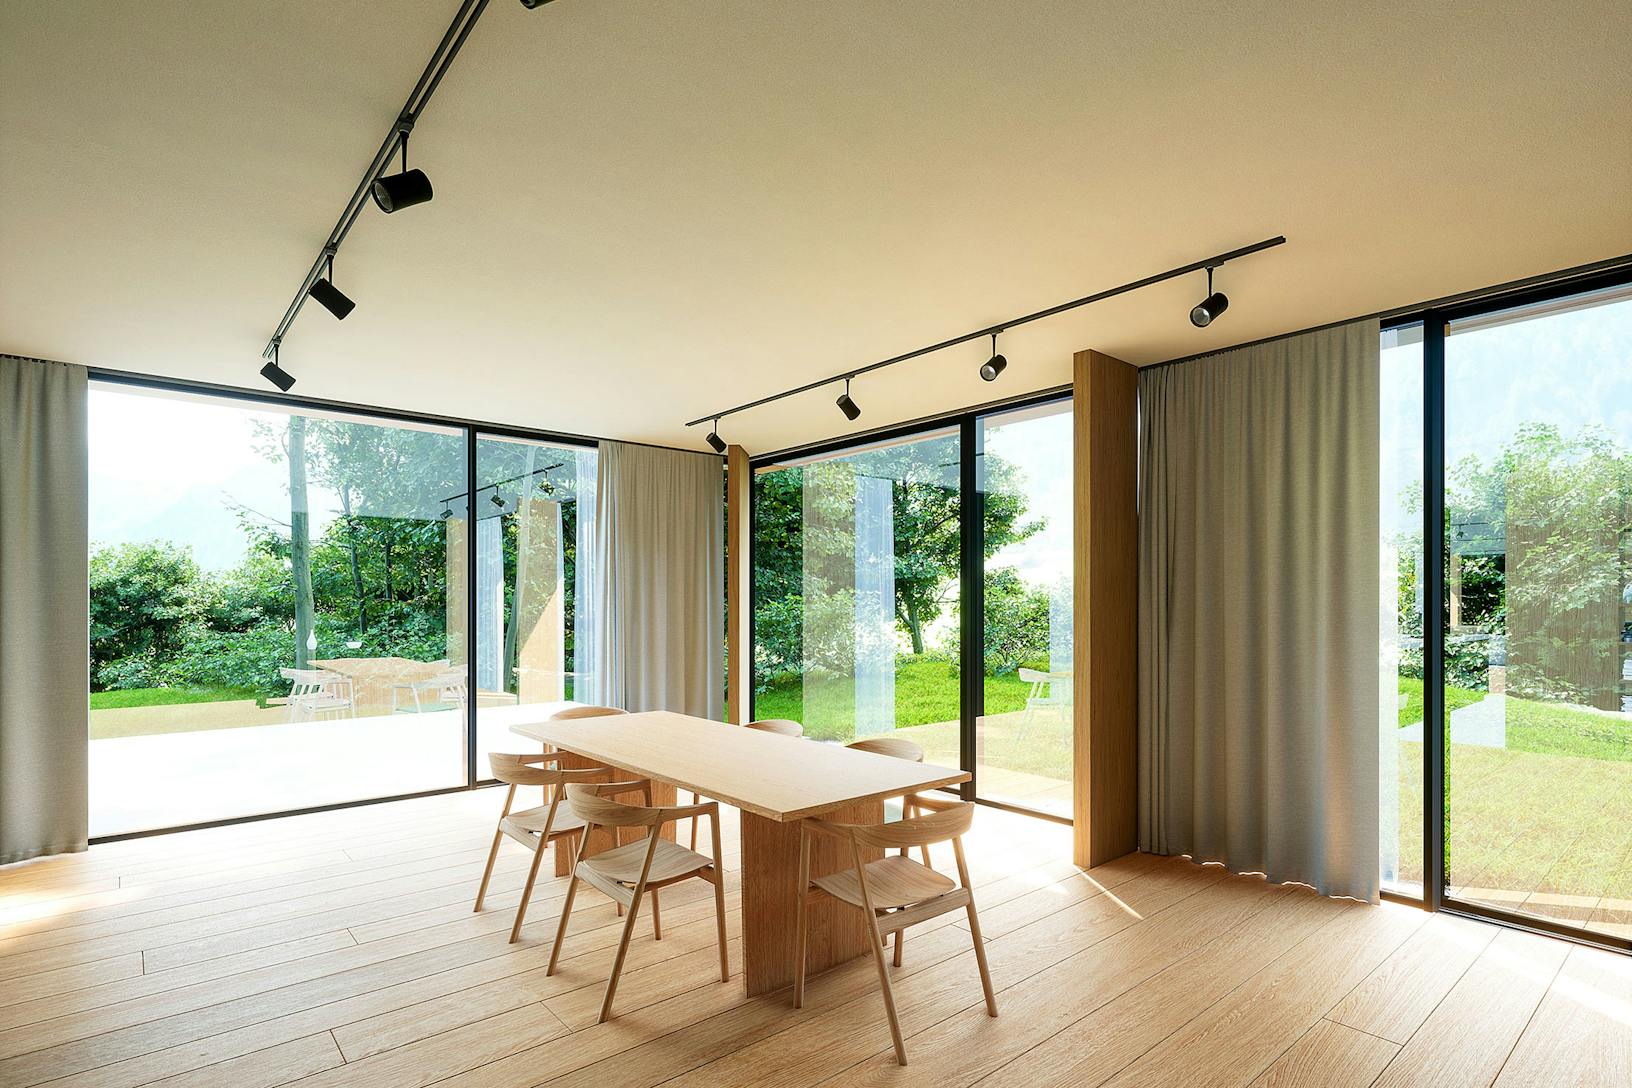 A dining room with minimal sliding glass walls and a wooden table